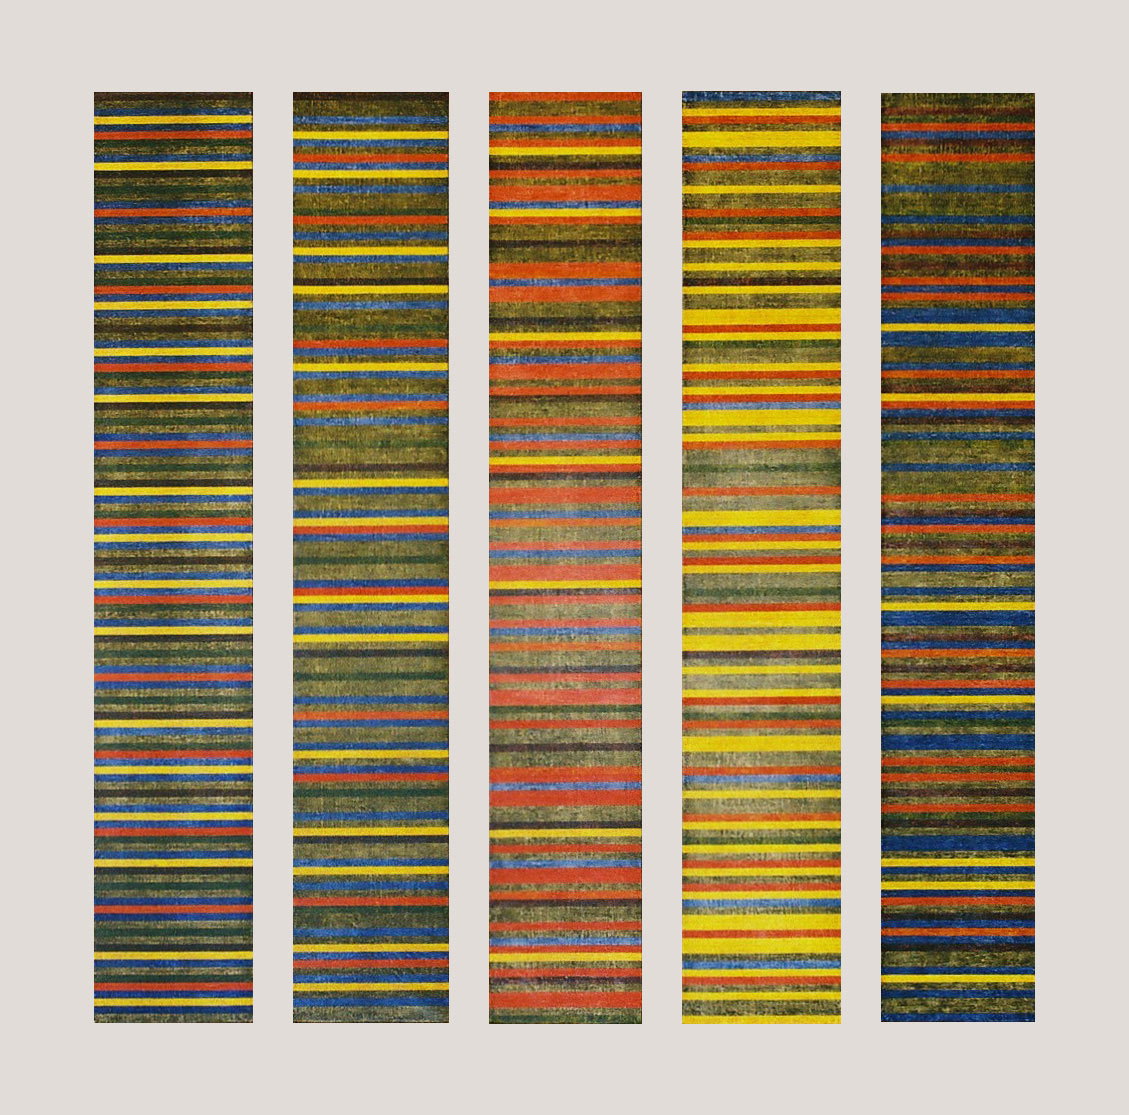 Polyptich of 5 canvases of 120 strips of one centimeter wide, painted of 3 colors blue, yellow and red, arranged every 2, 3 and 5 strips in the first painting on the left, then, every 3, 5 and 8 in the 2nd one, every 5, 8 and 13 in the middle one, every 8, 13 and 21 in the 4th one and, every 21, 34 and 55 strips in the last one on the right.